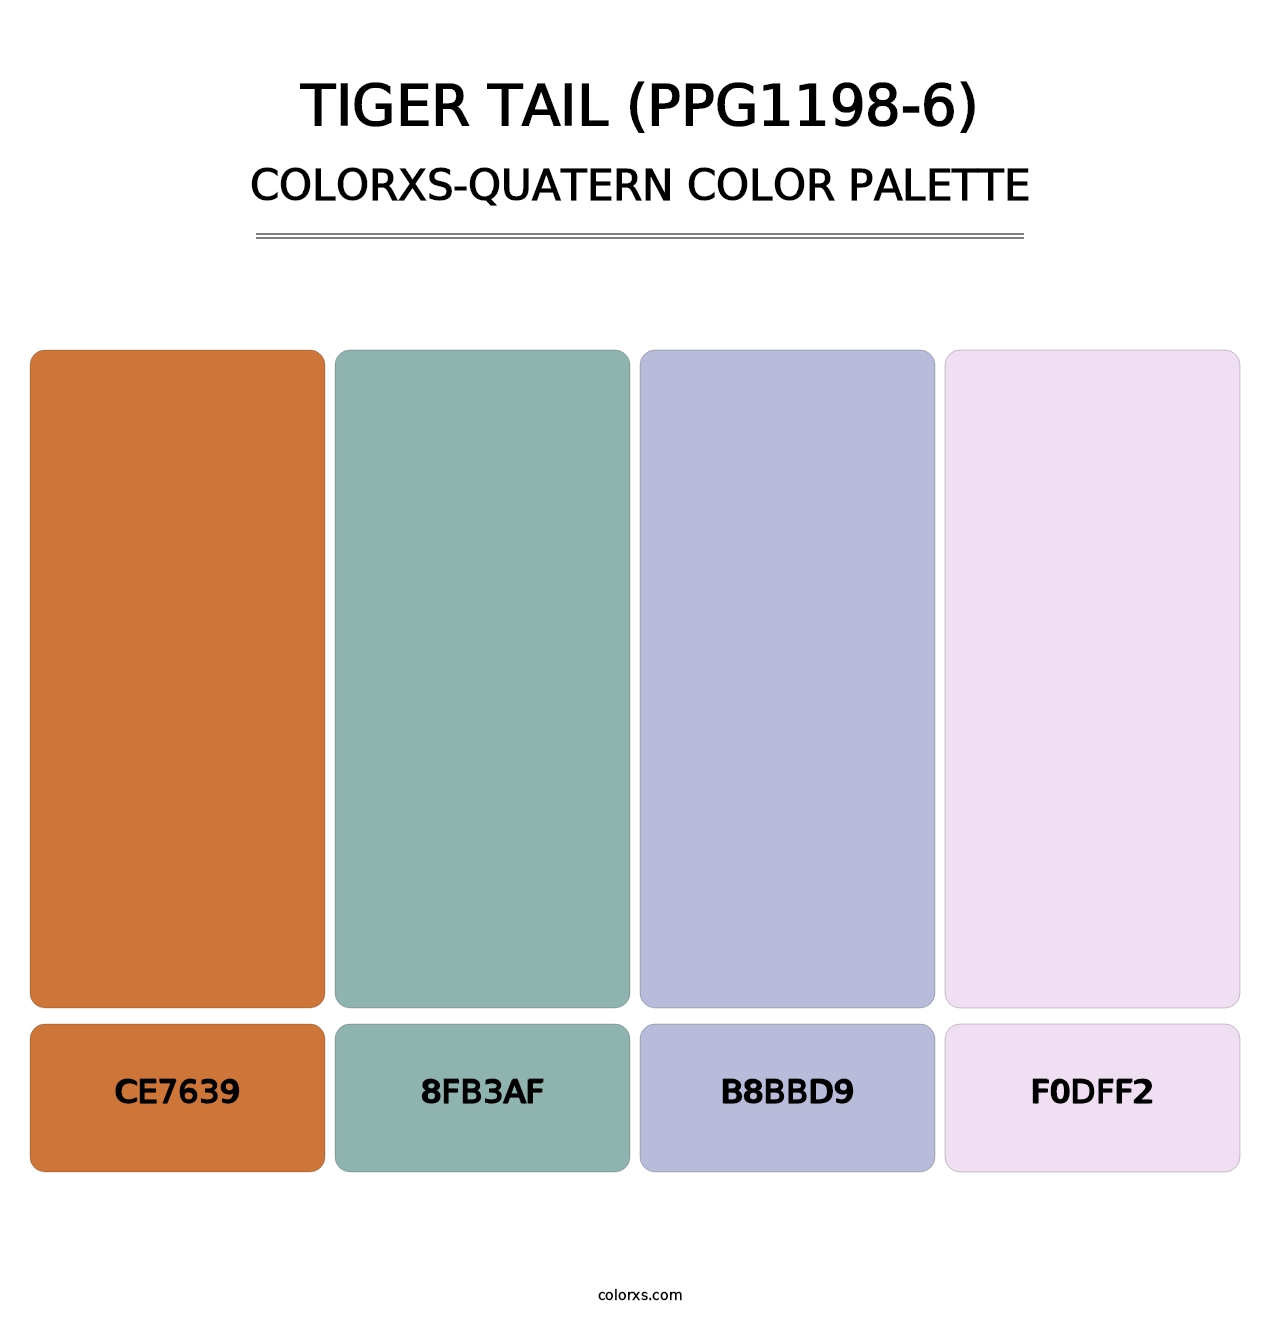 Tiger Tail (PPG1198-6) - Colorxs Quatern Palette